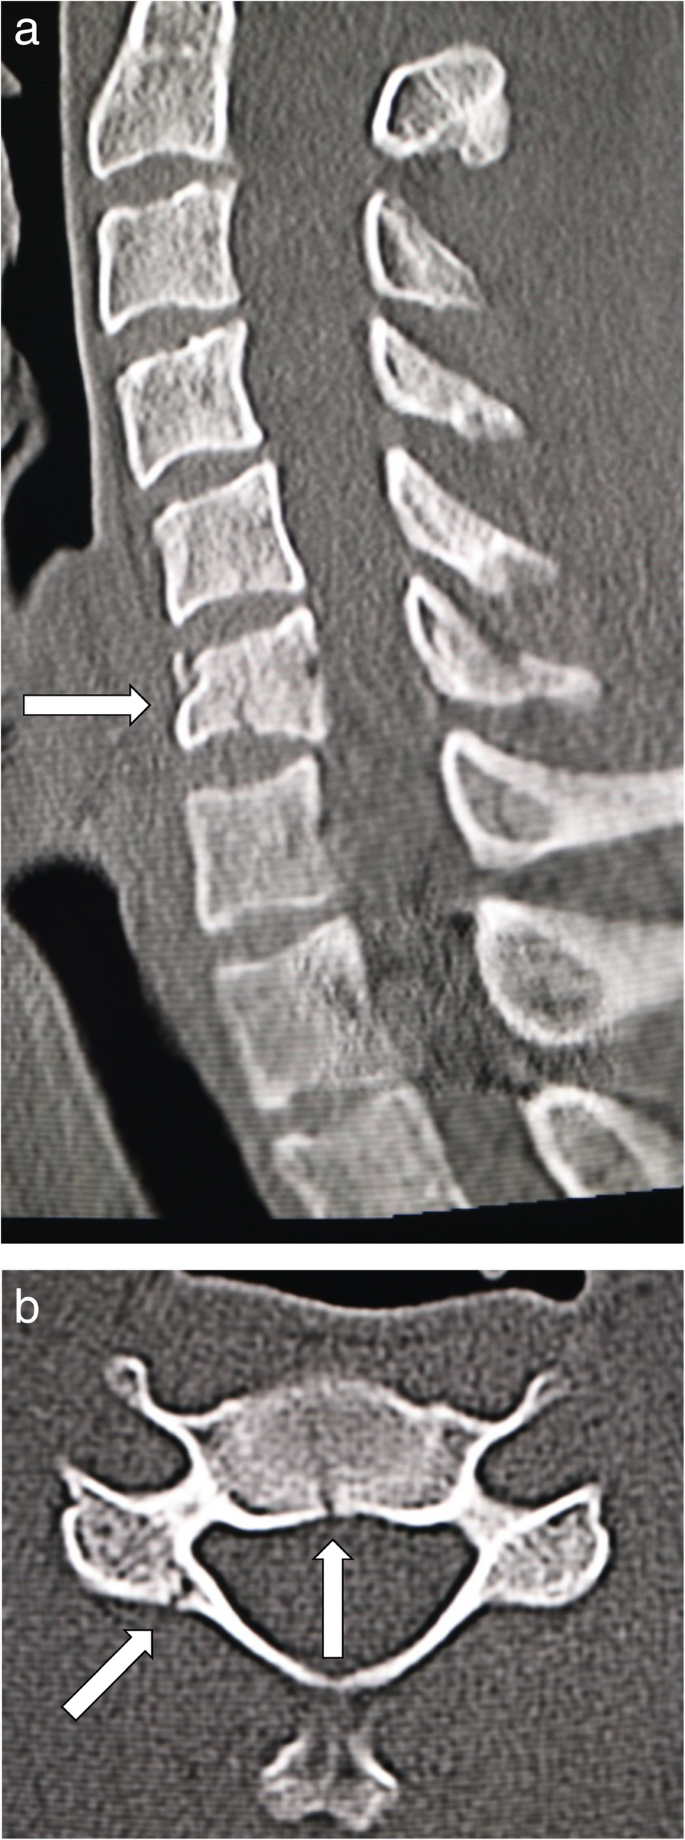 Progression of local kyphosis after conservative treatment for compressive  cervical spine fracture with spinal cord injury | Journal of Orthopaedic  Surgery and Research | Full Text